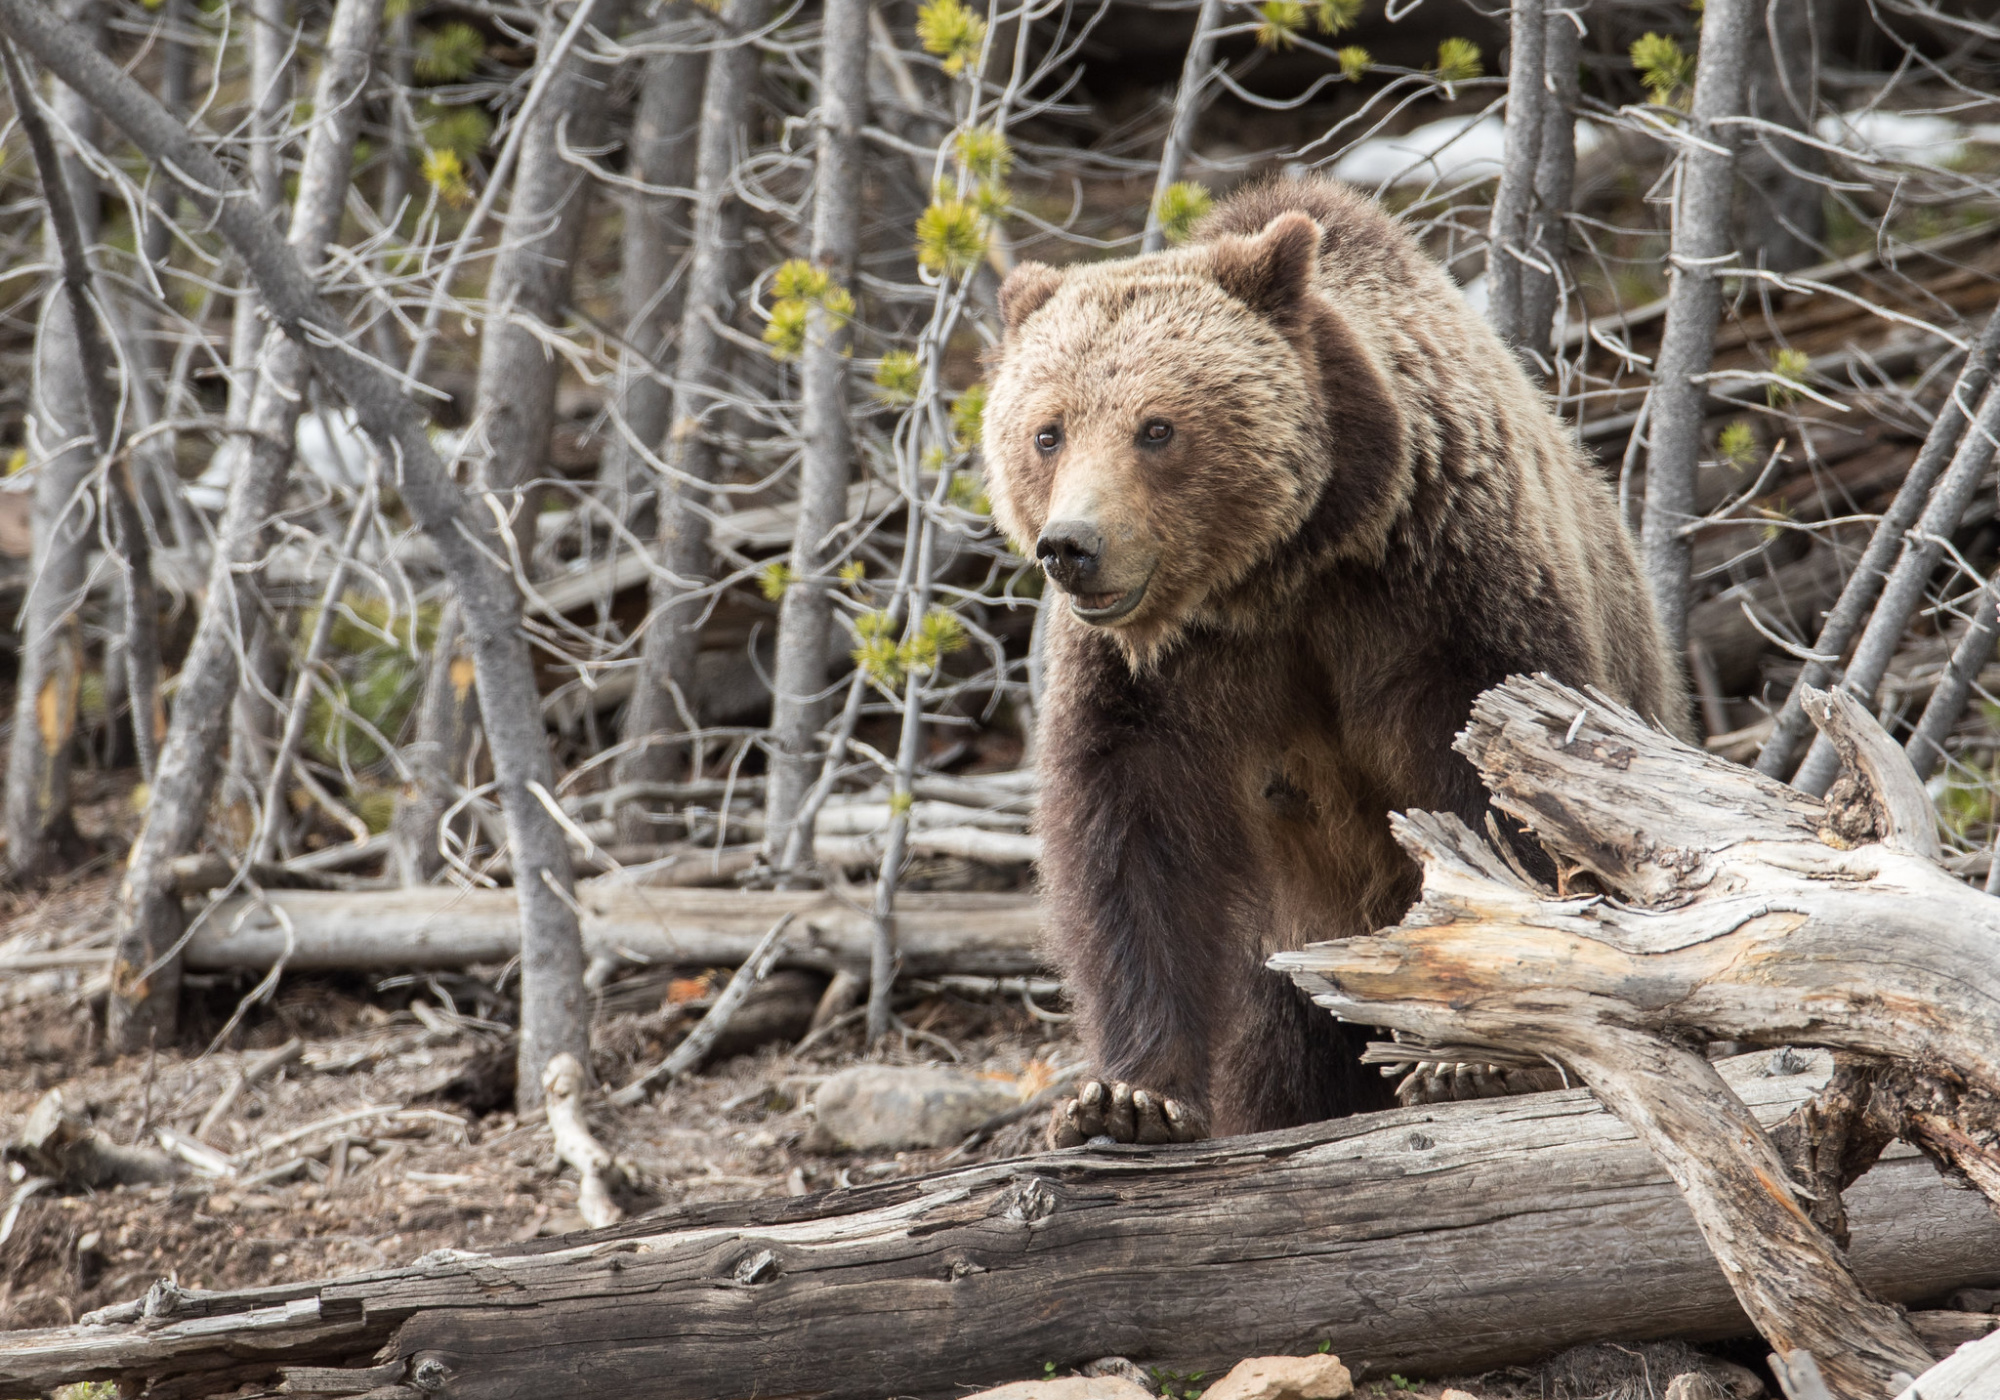 Wyoming wrestlers attacked by bear